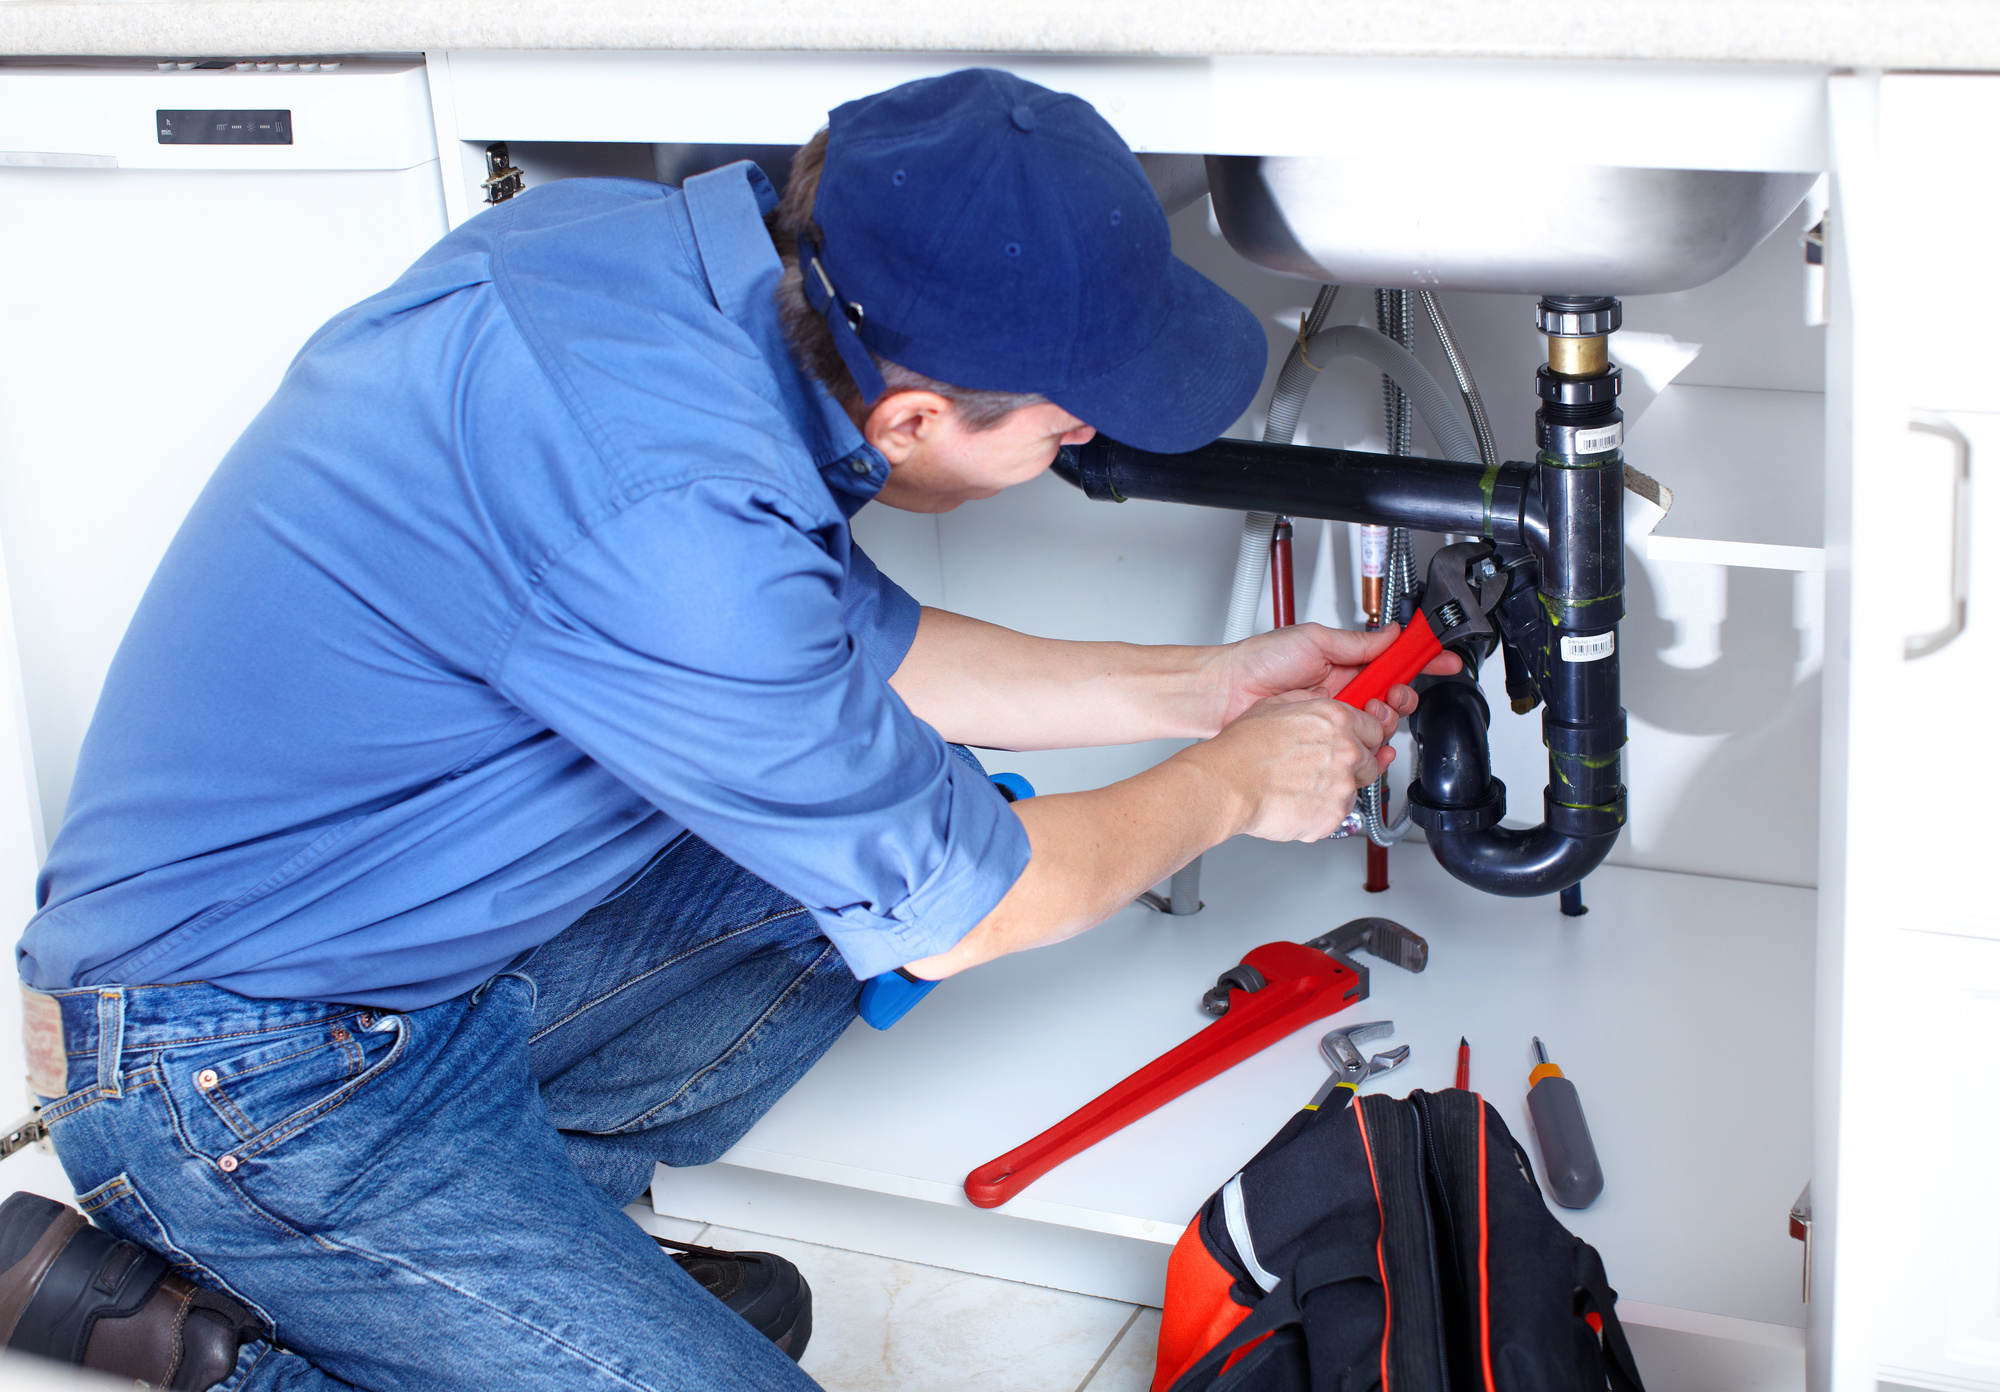 Hiring a Handyman Vs a Plumber: Which Do You Need?